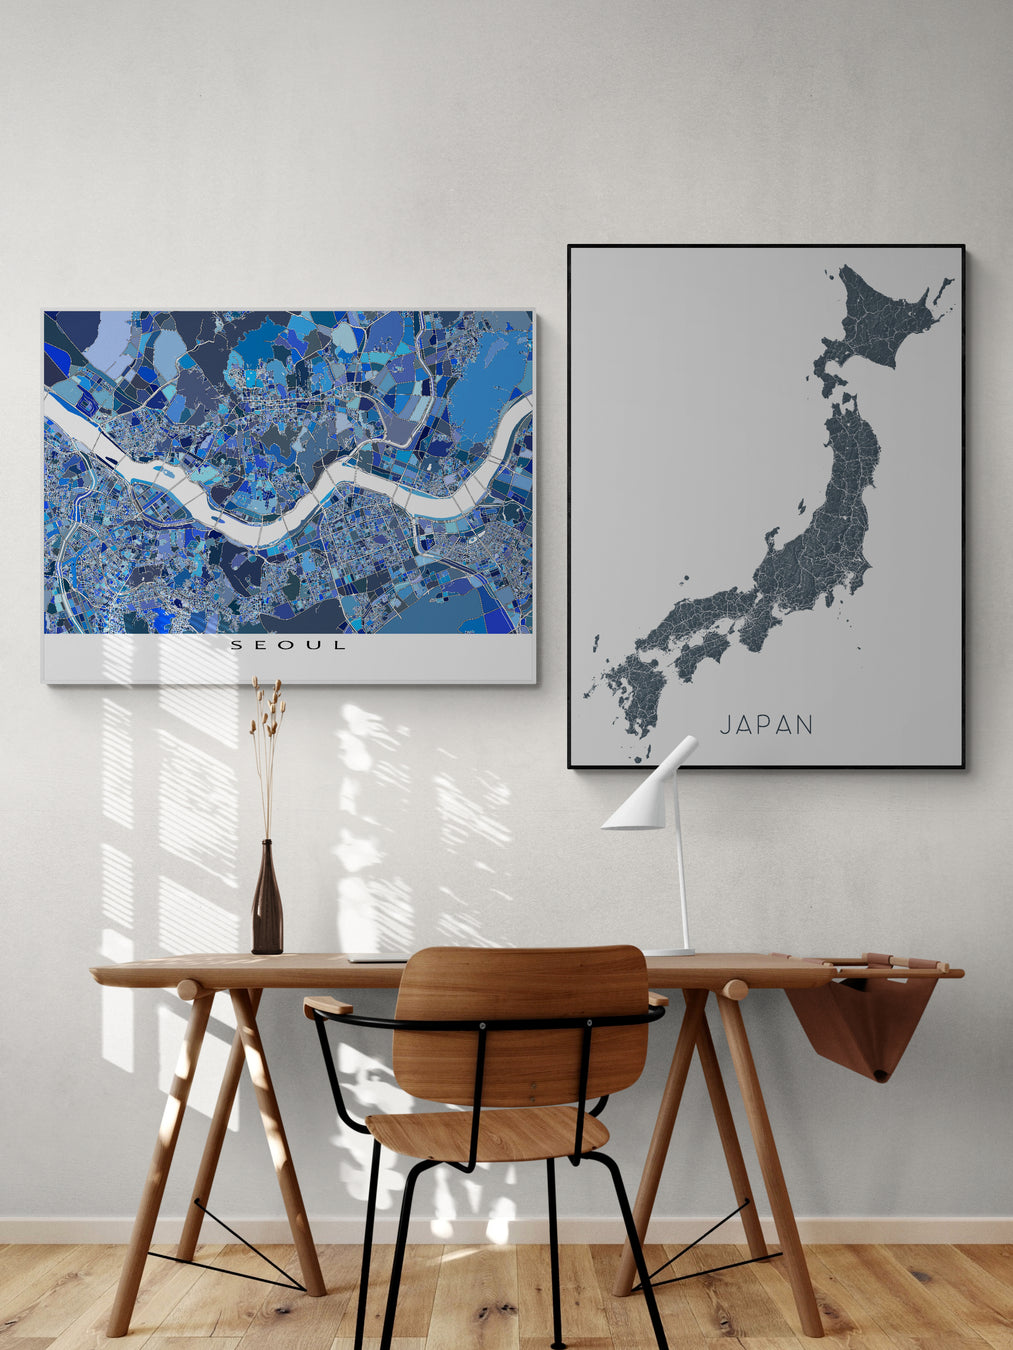 A asia collection of map art prints by Maps As Art.